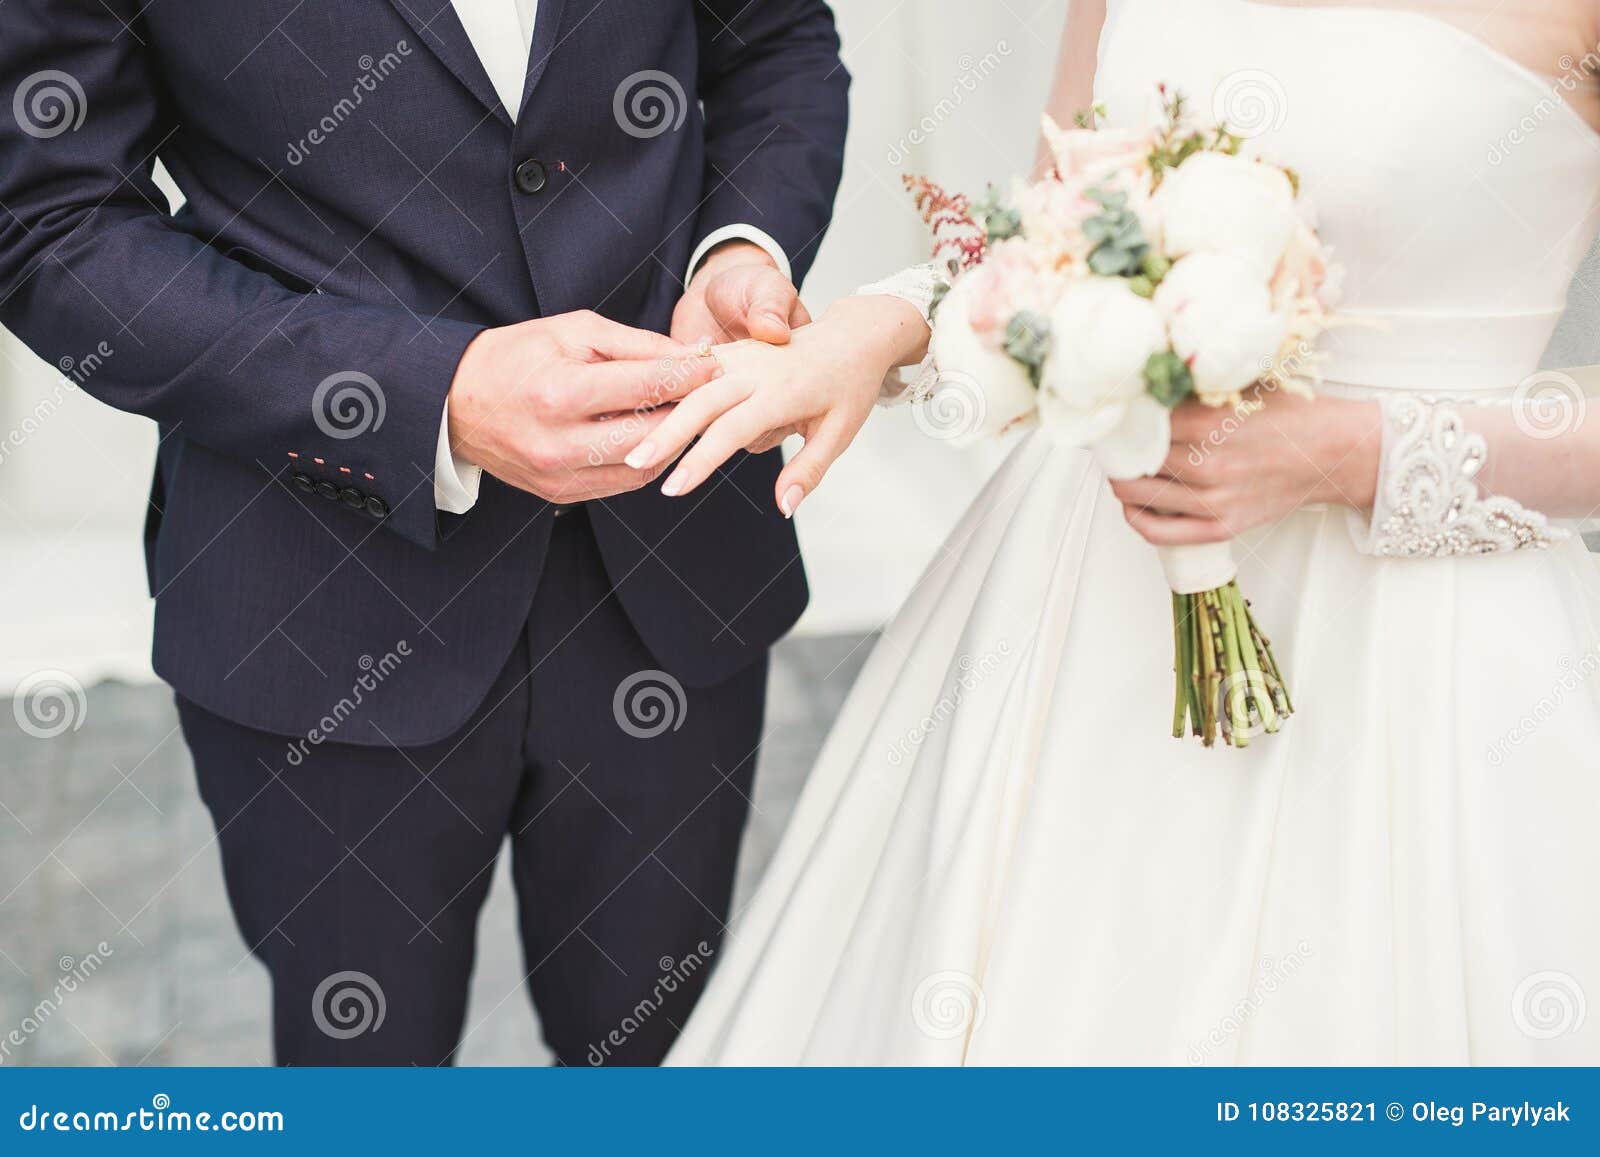 Bride and Groom Exchanging Wedding Rings. Stylish Couple Official ...